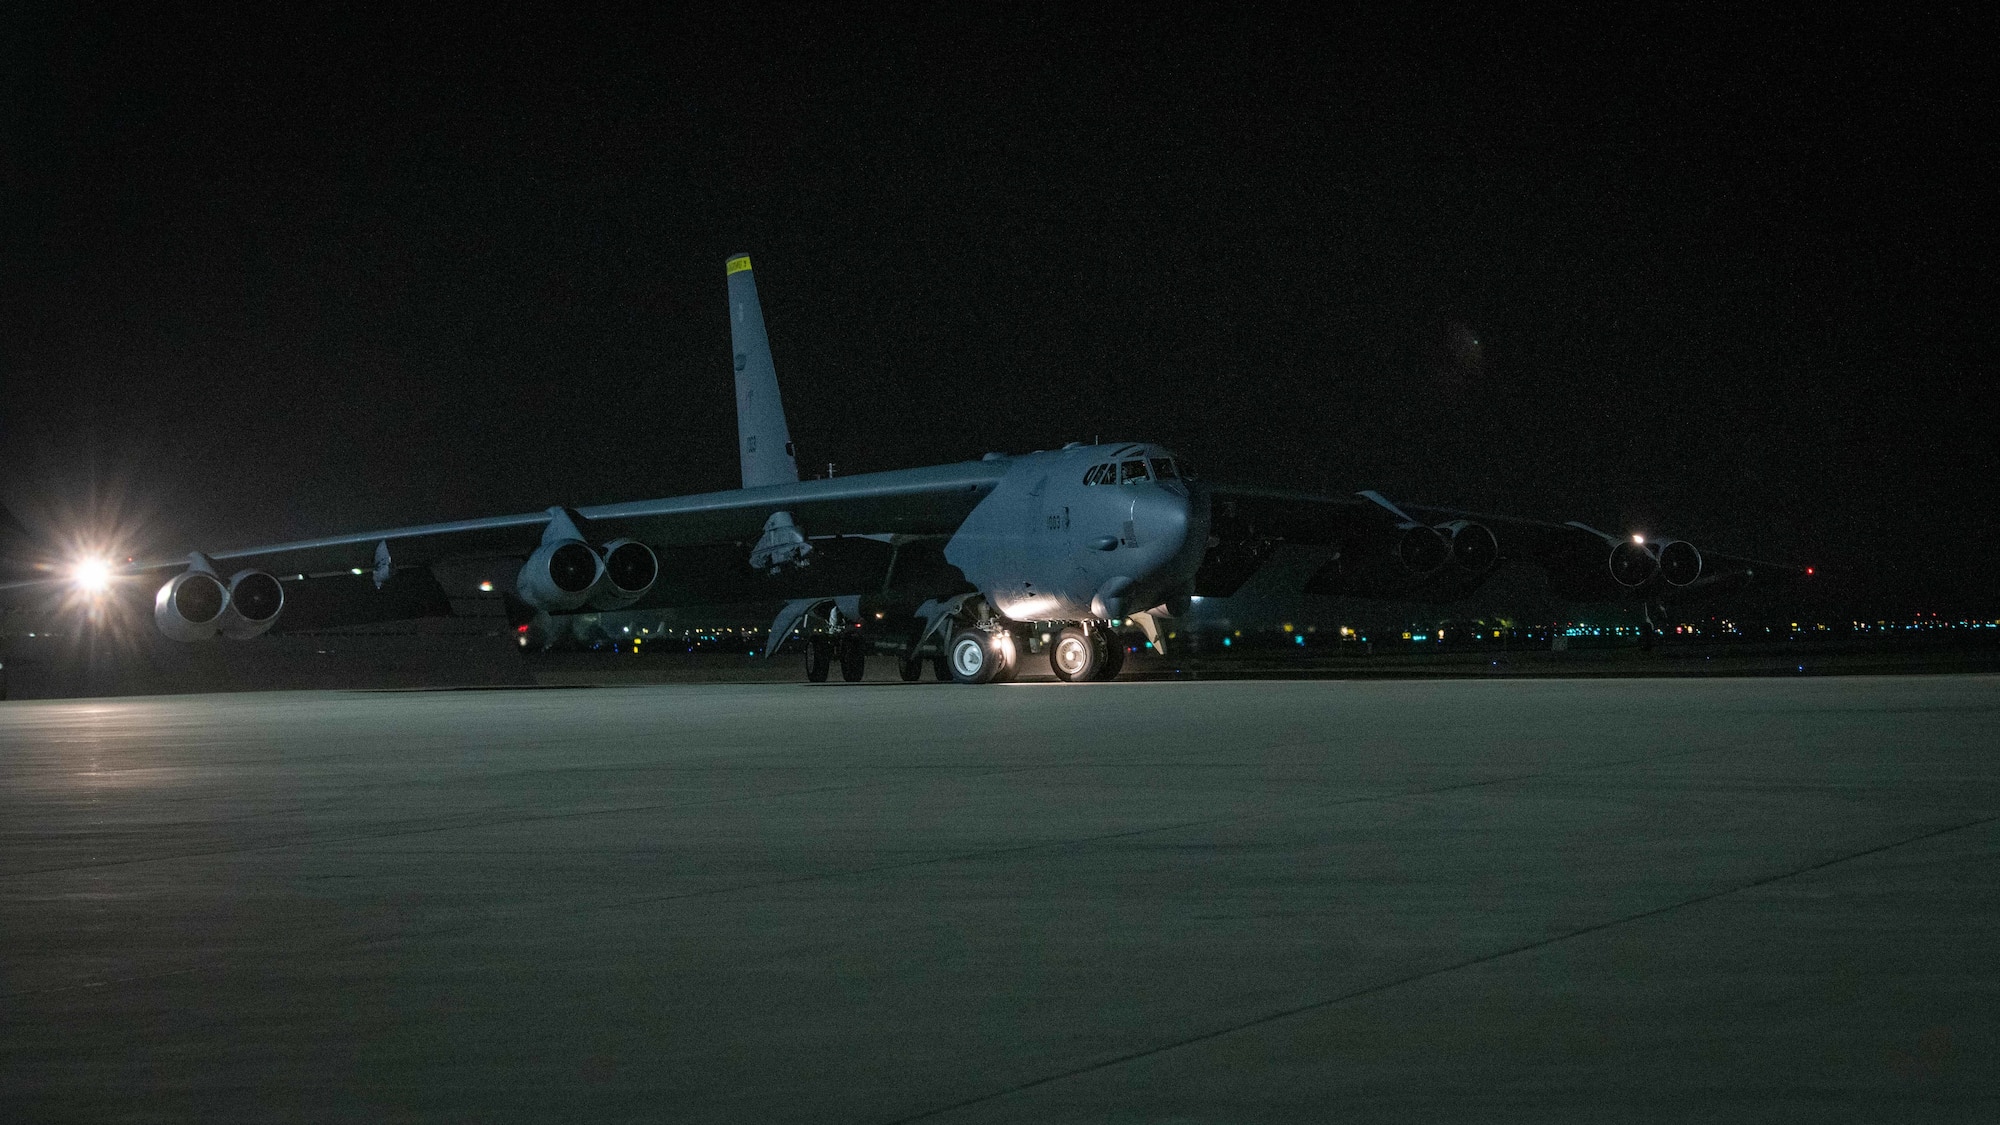 A B-52H Stratofortress aircraft assigned to the 5th Bomb Wing, Minot Air Force Base, North Dakota, arrives May 4, 2021, at Al Udeid Air Base, Qatar.  Two additional bombers arrived May 4, joining the four B-52 aircraft that arrived in late April to protect the orderly and responsible withdrawal of U.S. and coalition forces from Afghanistan.  (U.S. Air Force photo by Staff Sgt. Greg Erwin)